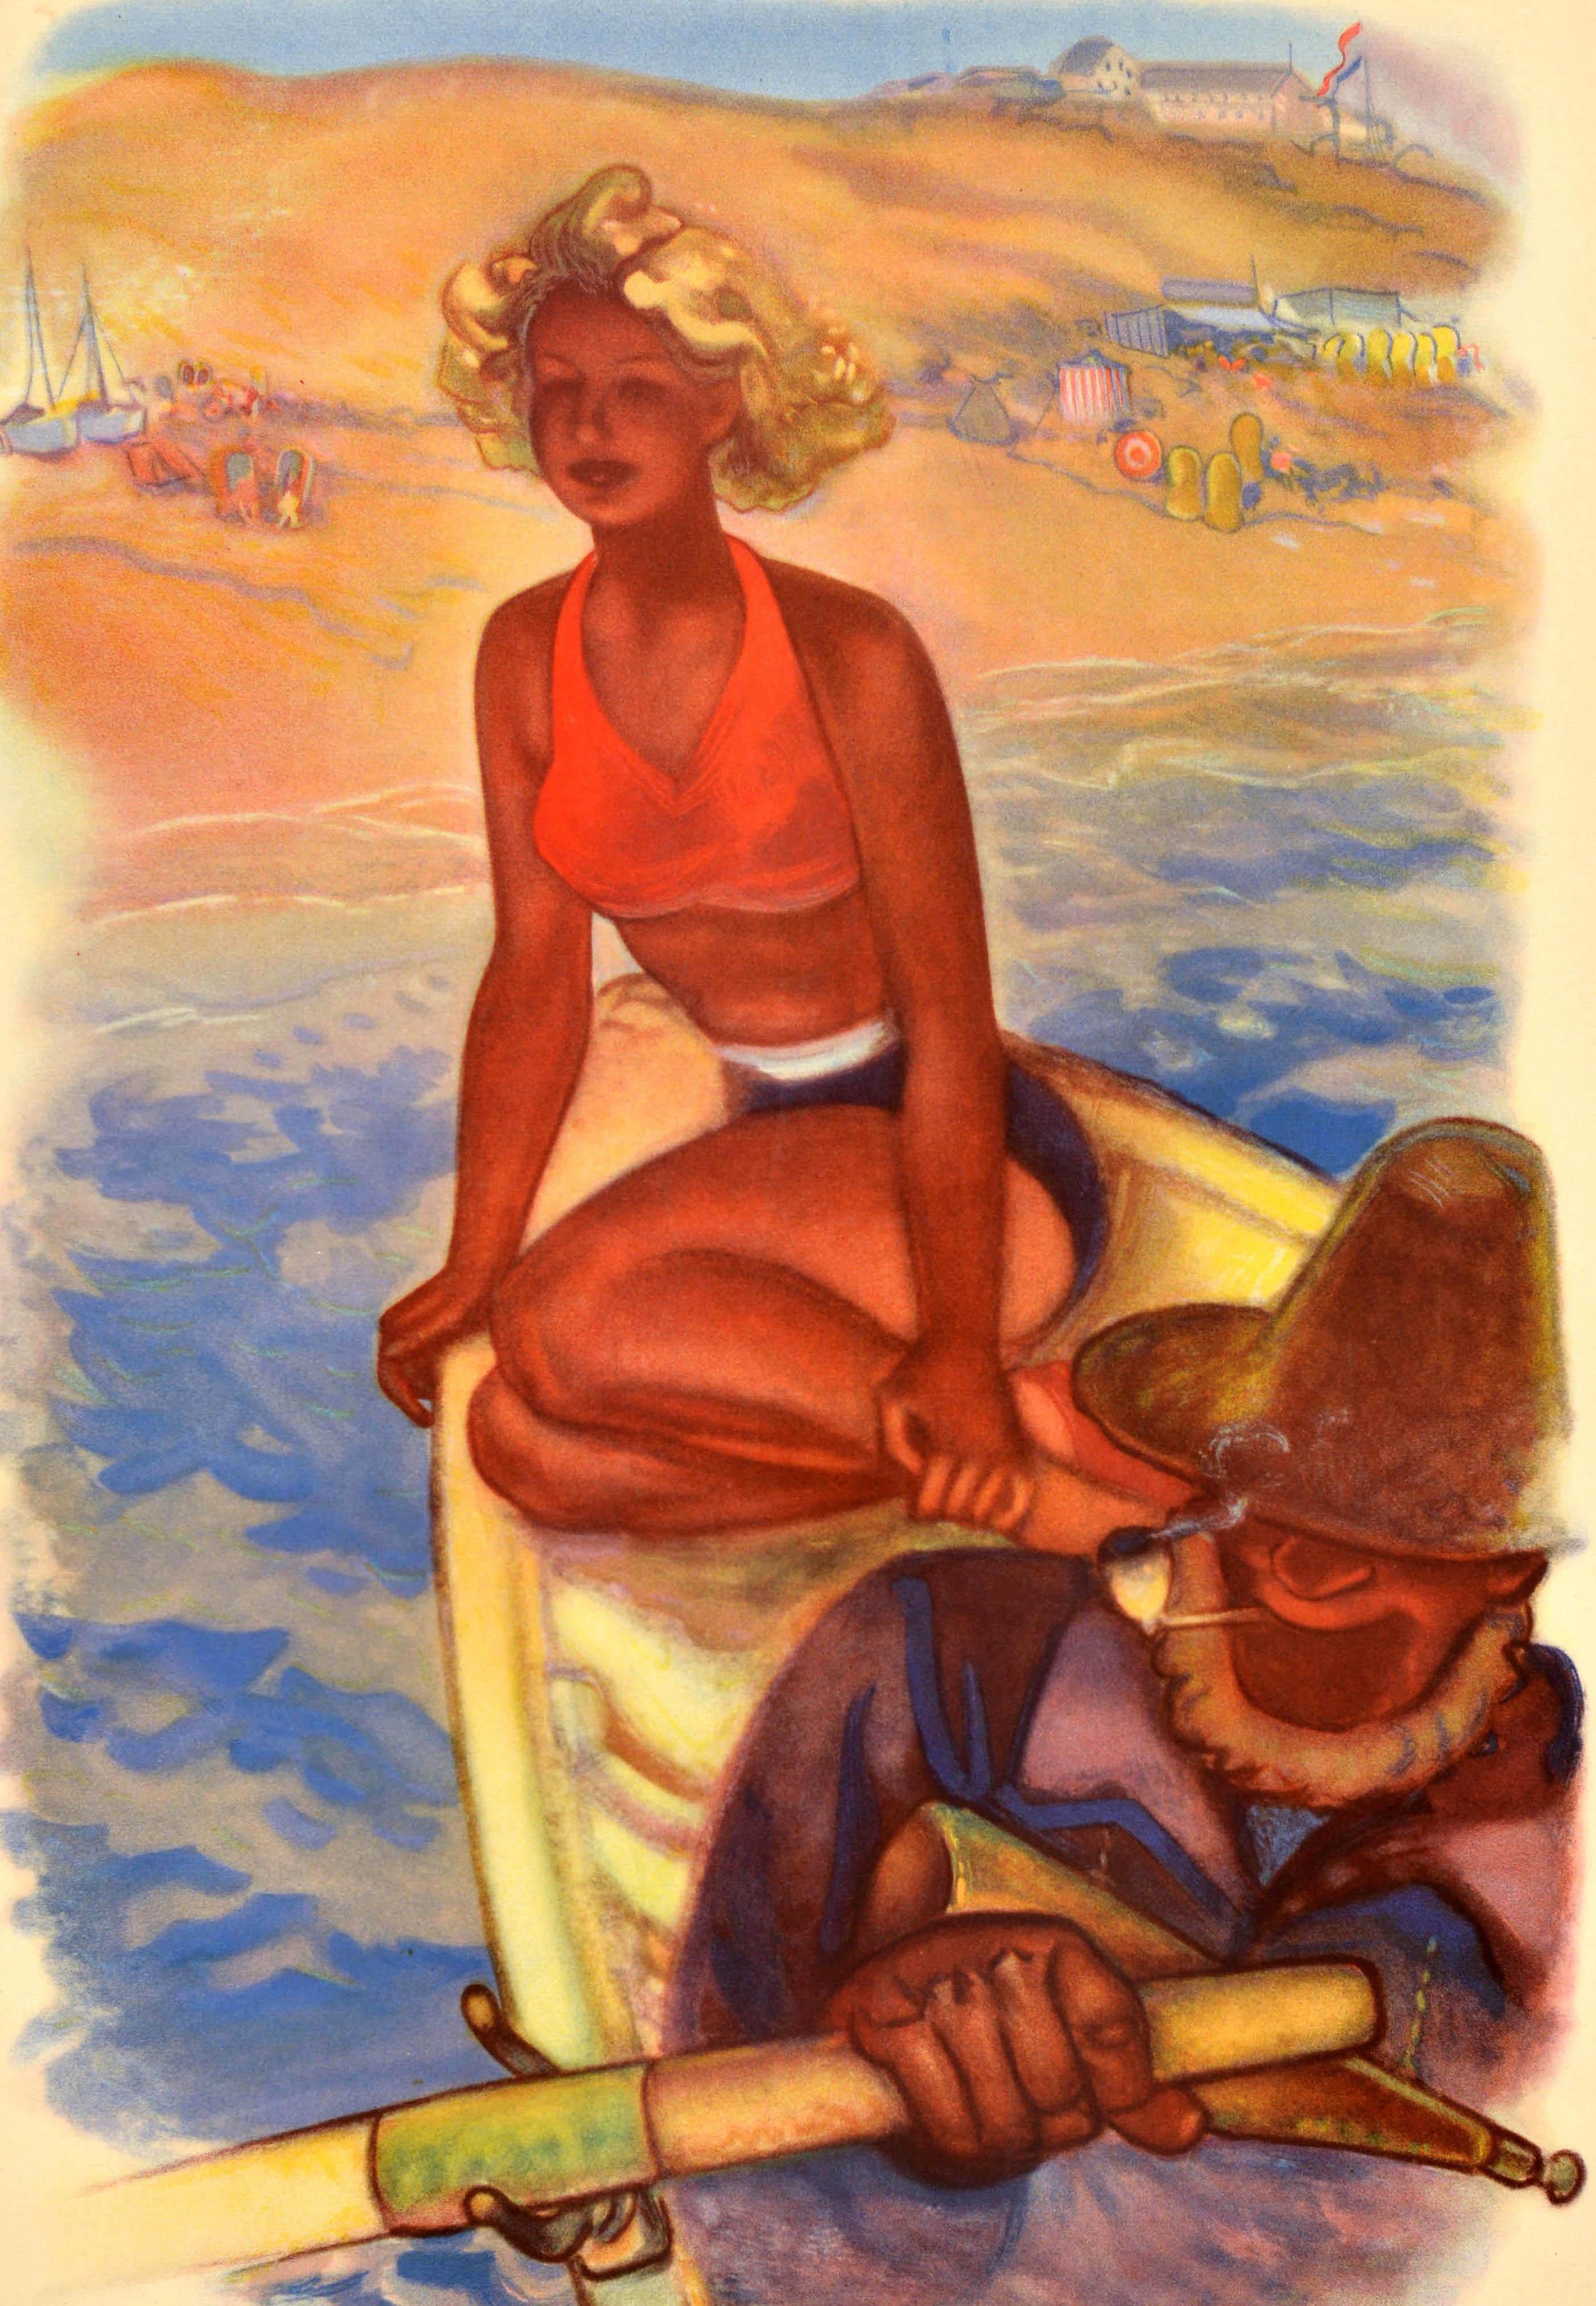 Original vintage travel poster for Holland featuring a lady in a bikini sitting on a wooden rowing boat being rowed by a pipe smoking sailor or fisherman in front of people on the beach in the background. Lithographed by Smeets & Schippers,